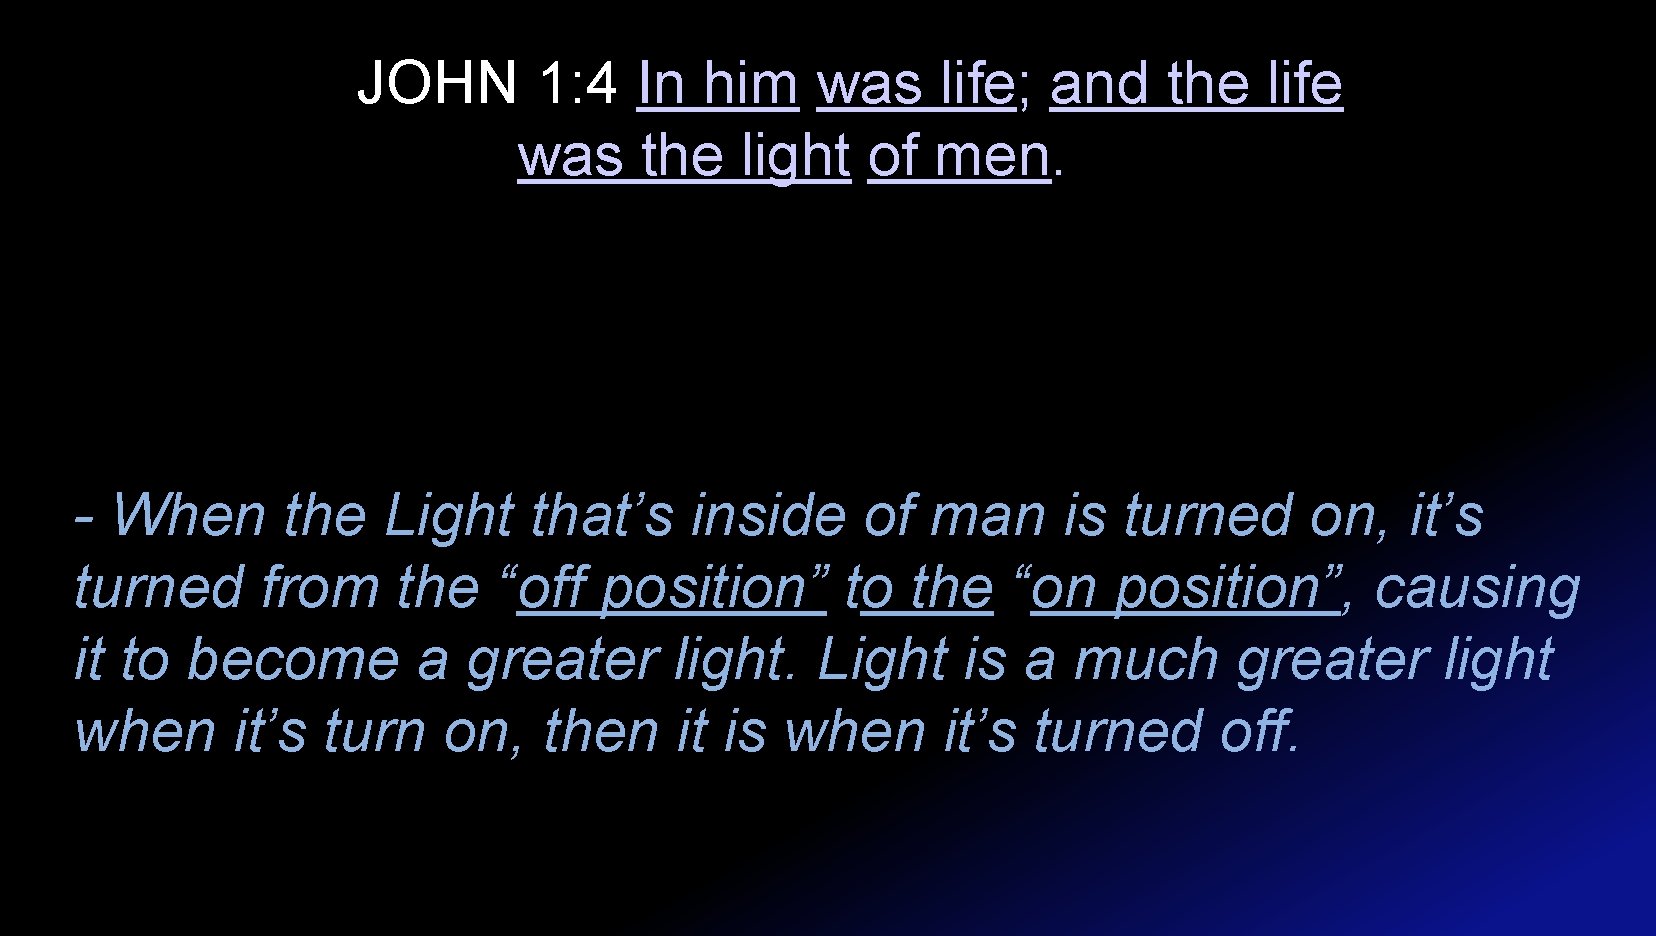 JOHN 1: 4 In him was life; and the life was the light of